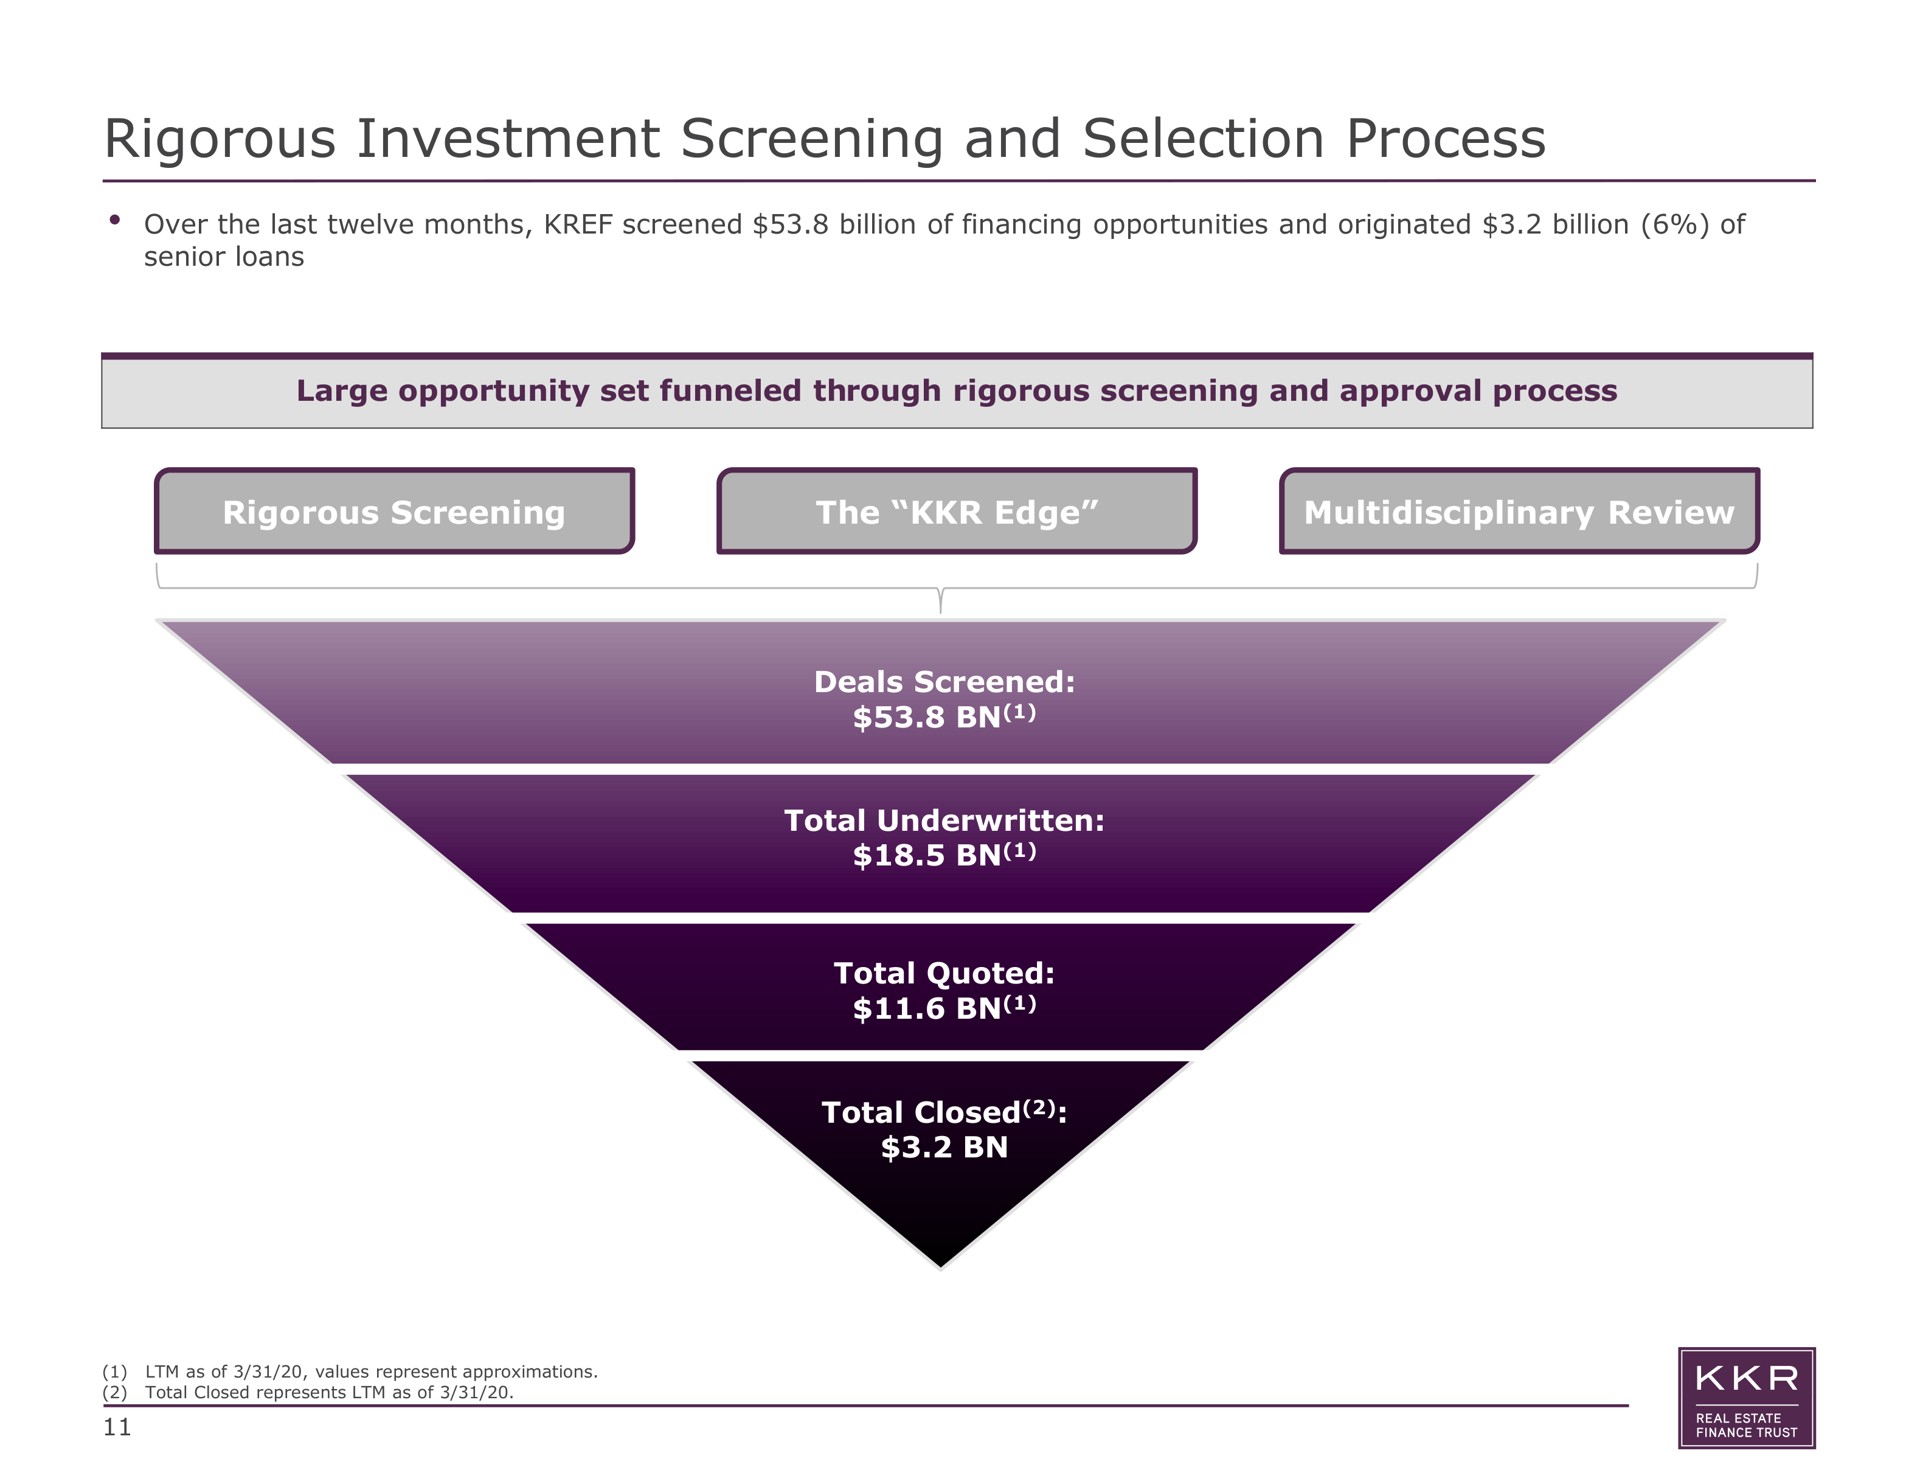 rigorous investment screening and selection process rigorous screening the edge review | KKR Real Estate Finance Trust